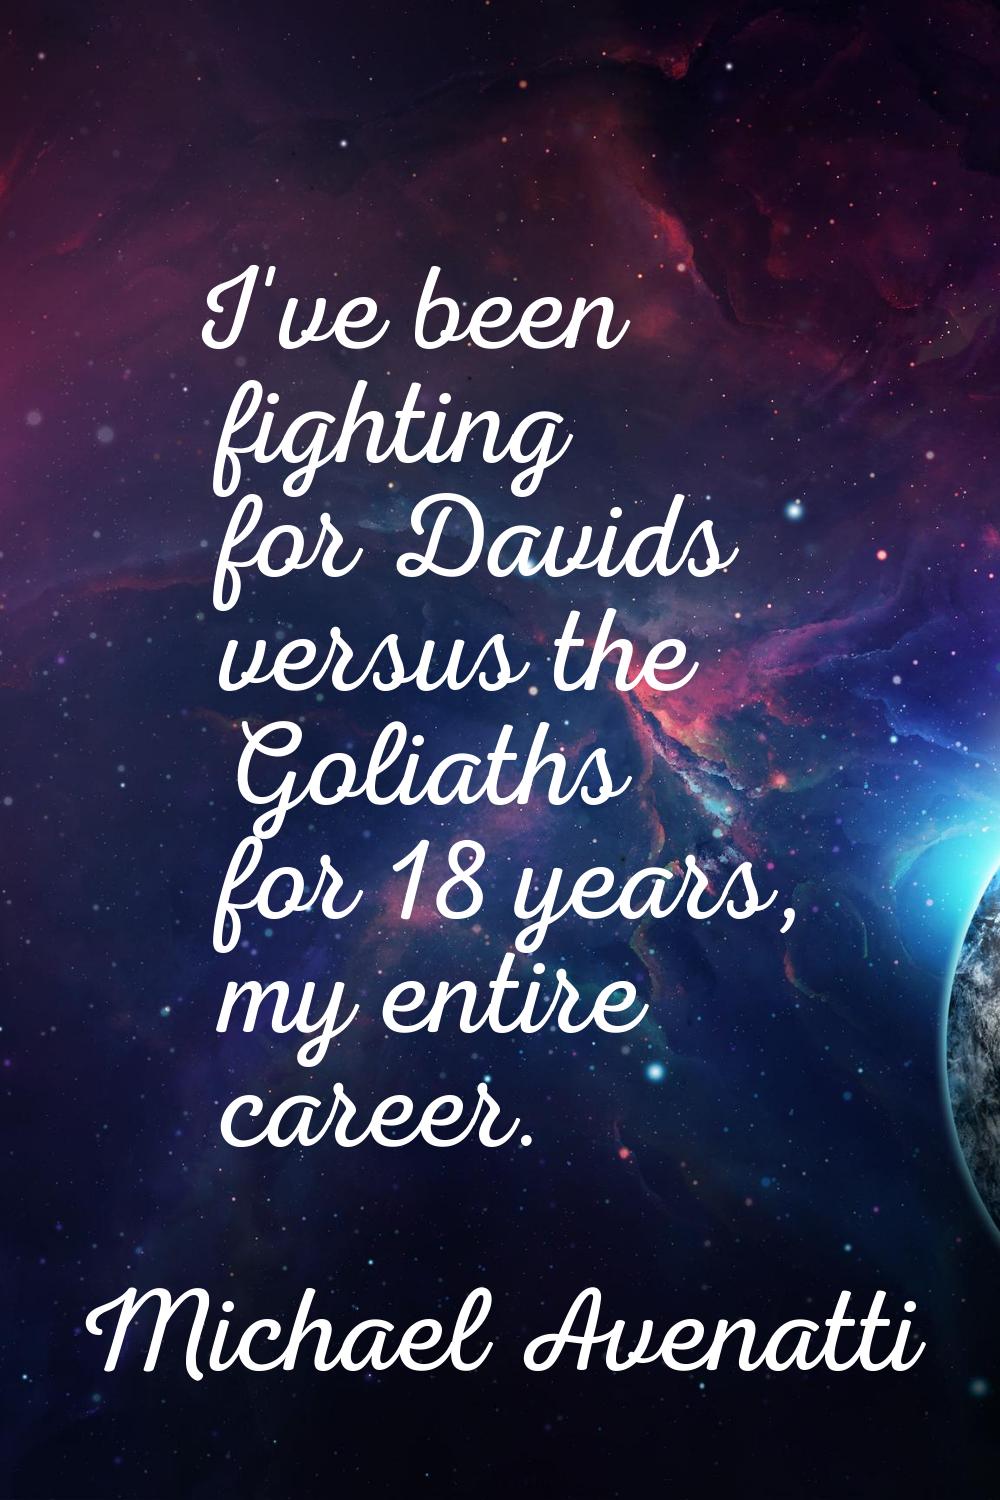 I've been fighting for Davids versus the Goliaths for 18 years, my entire career.